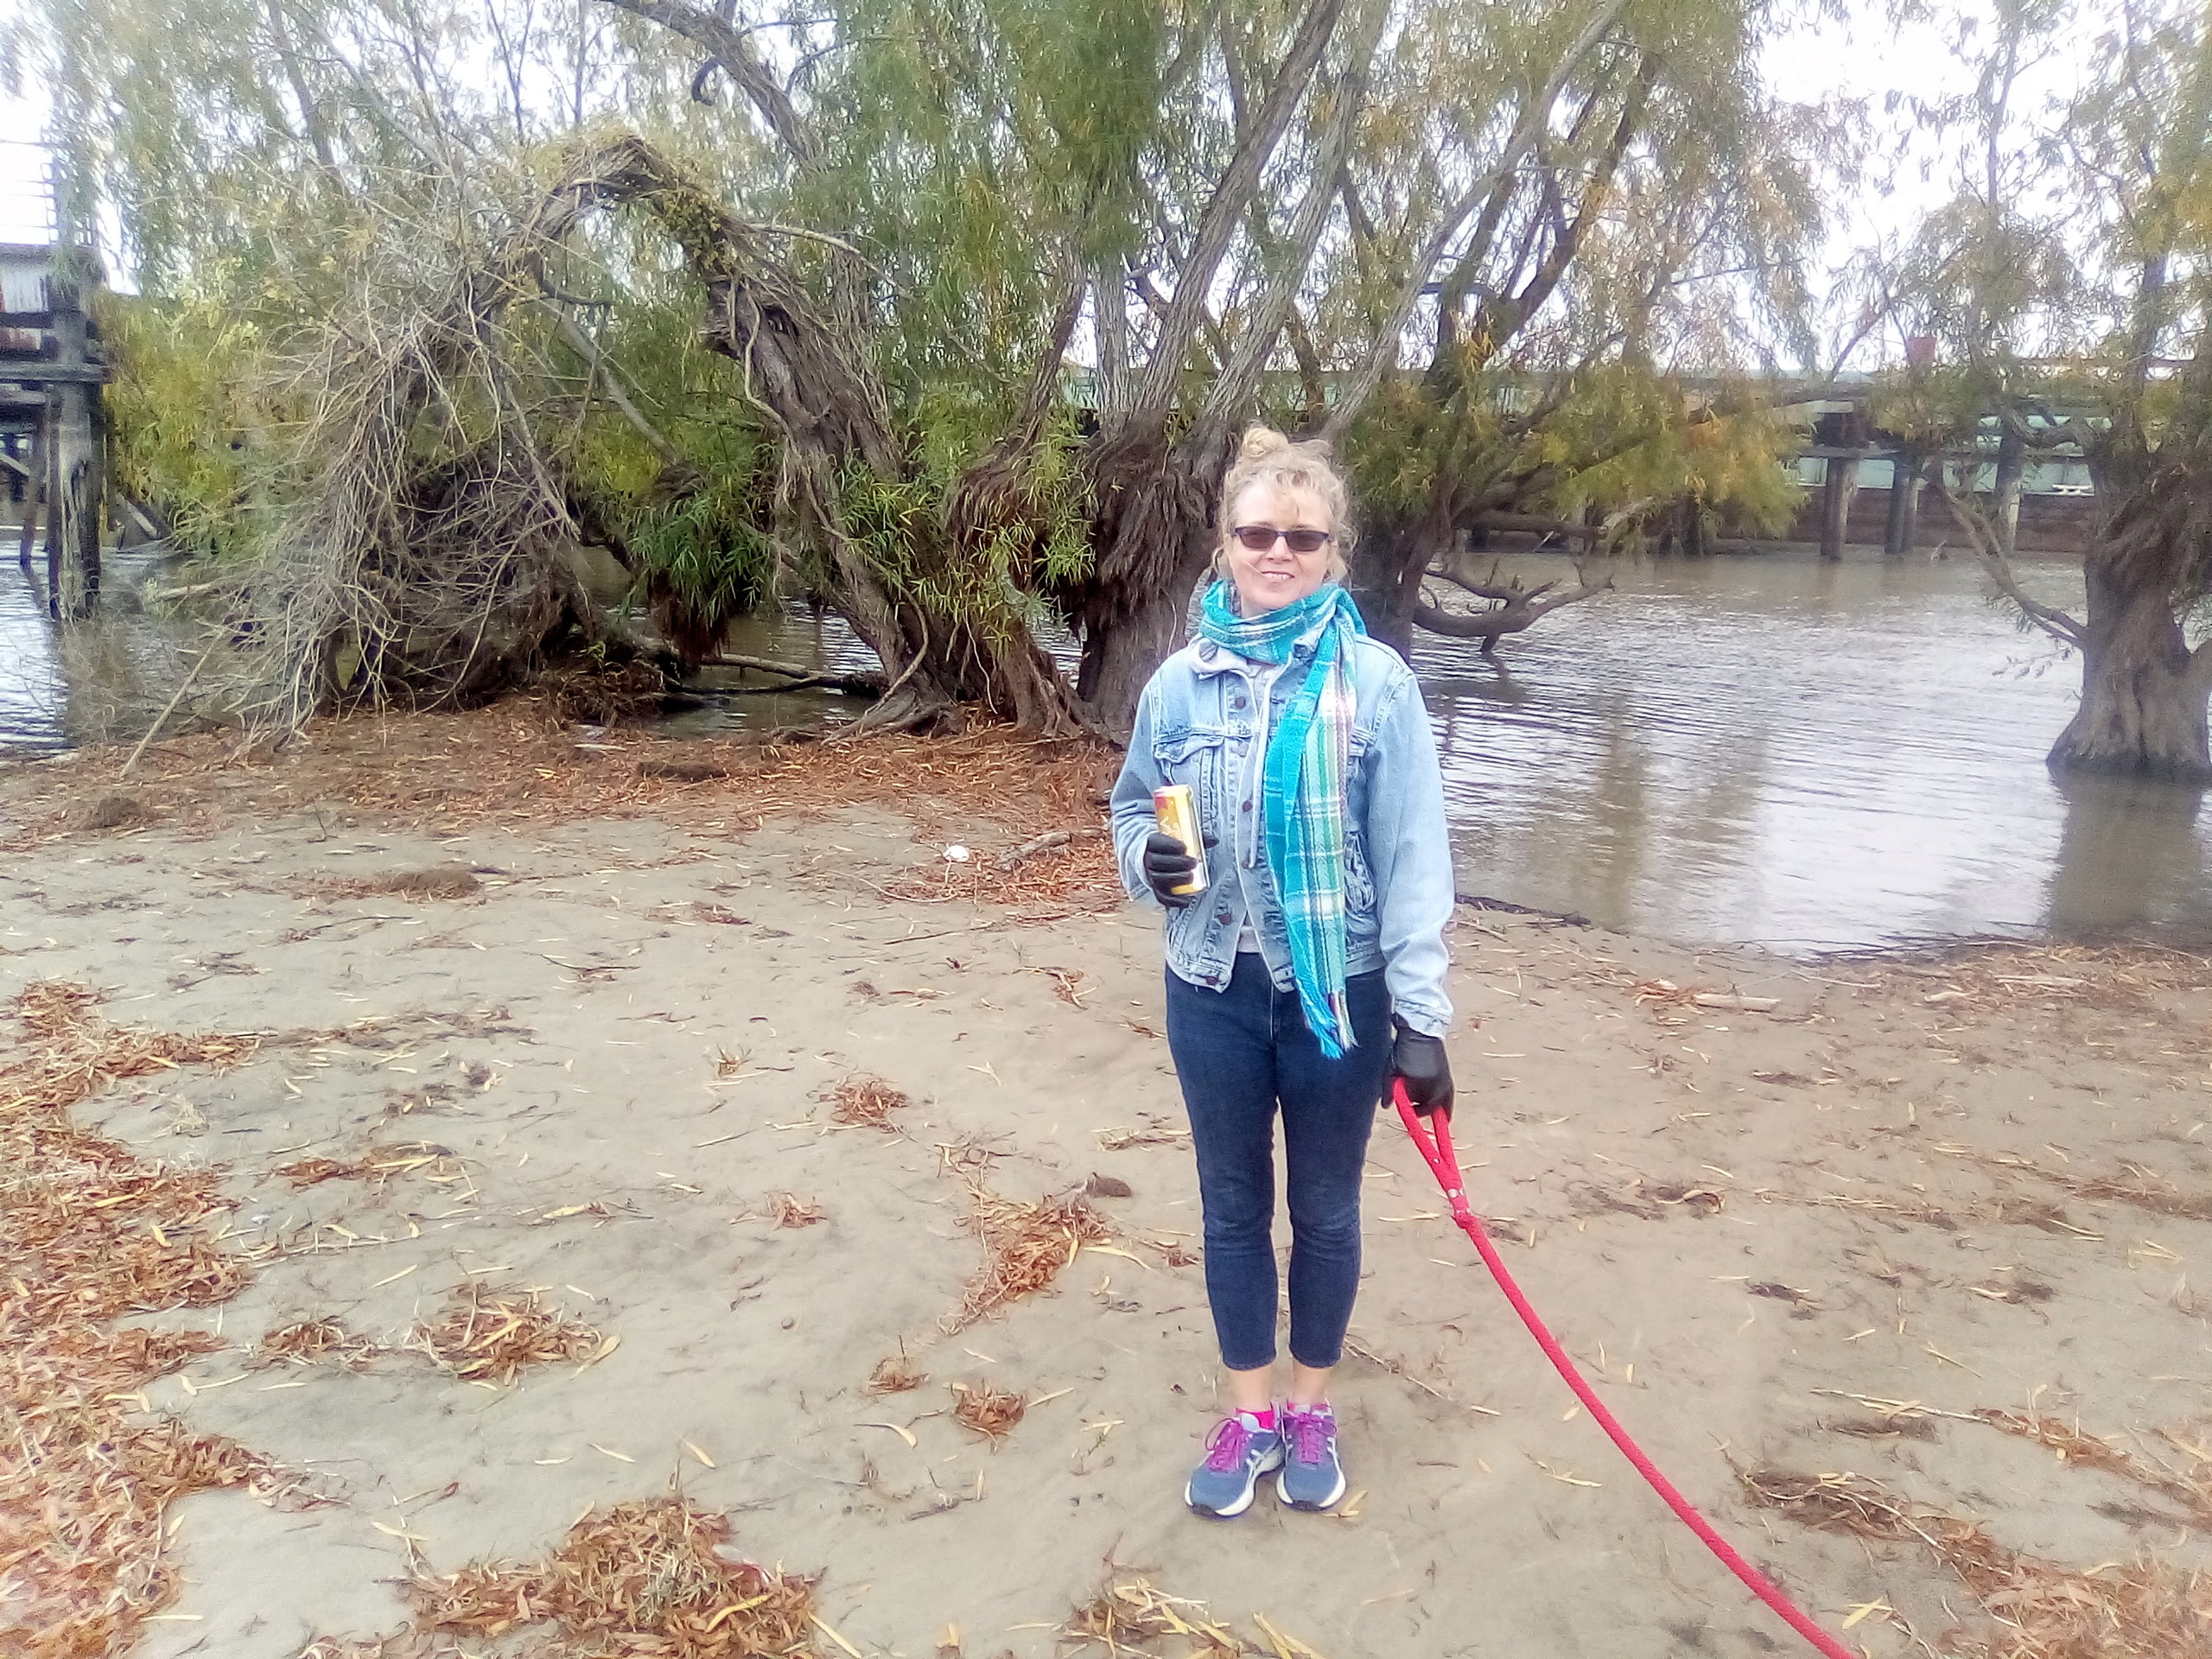 Gina Phillips on the river bank hlding a leash